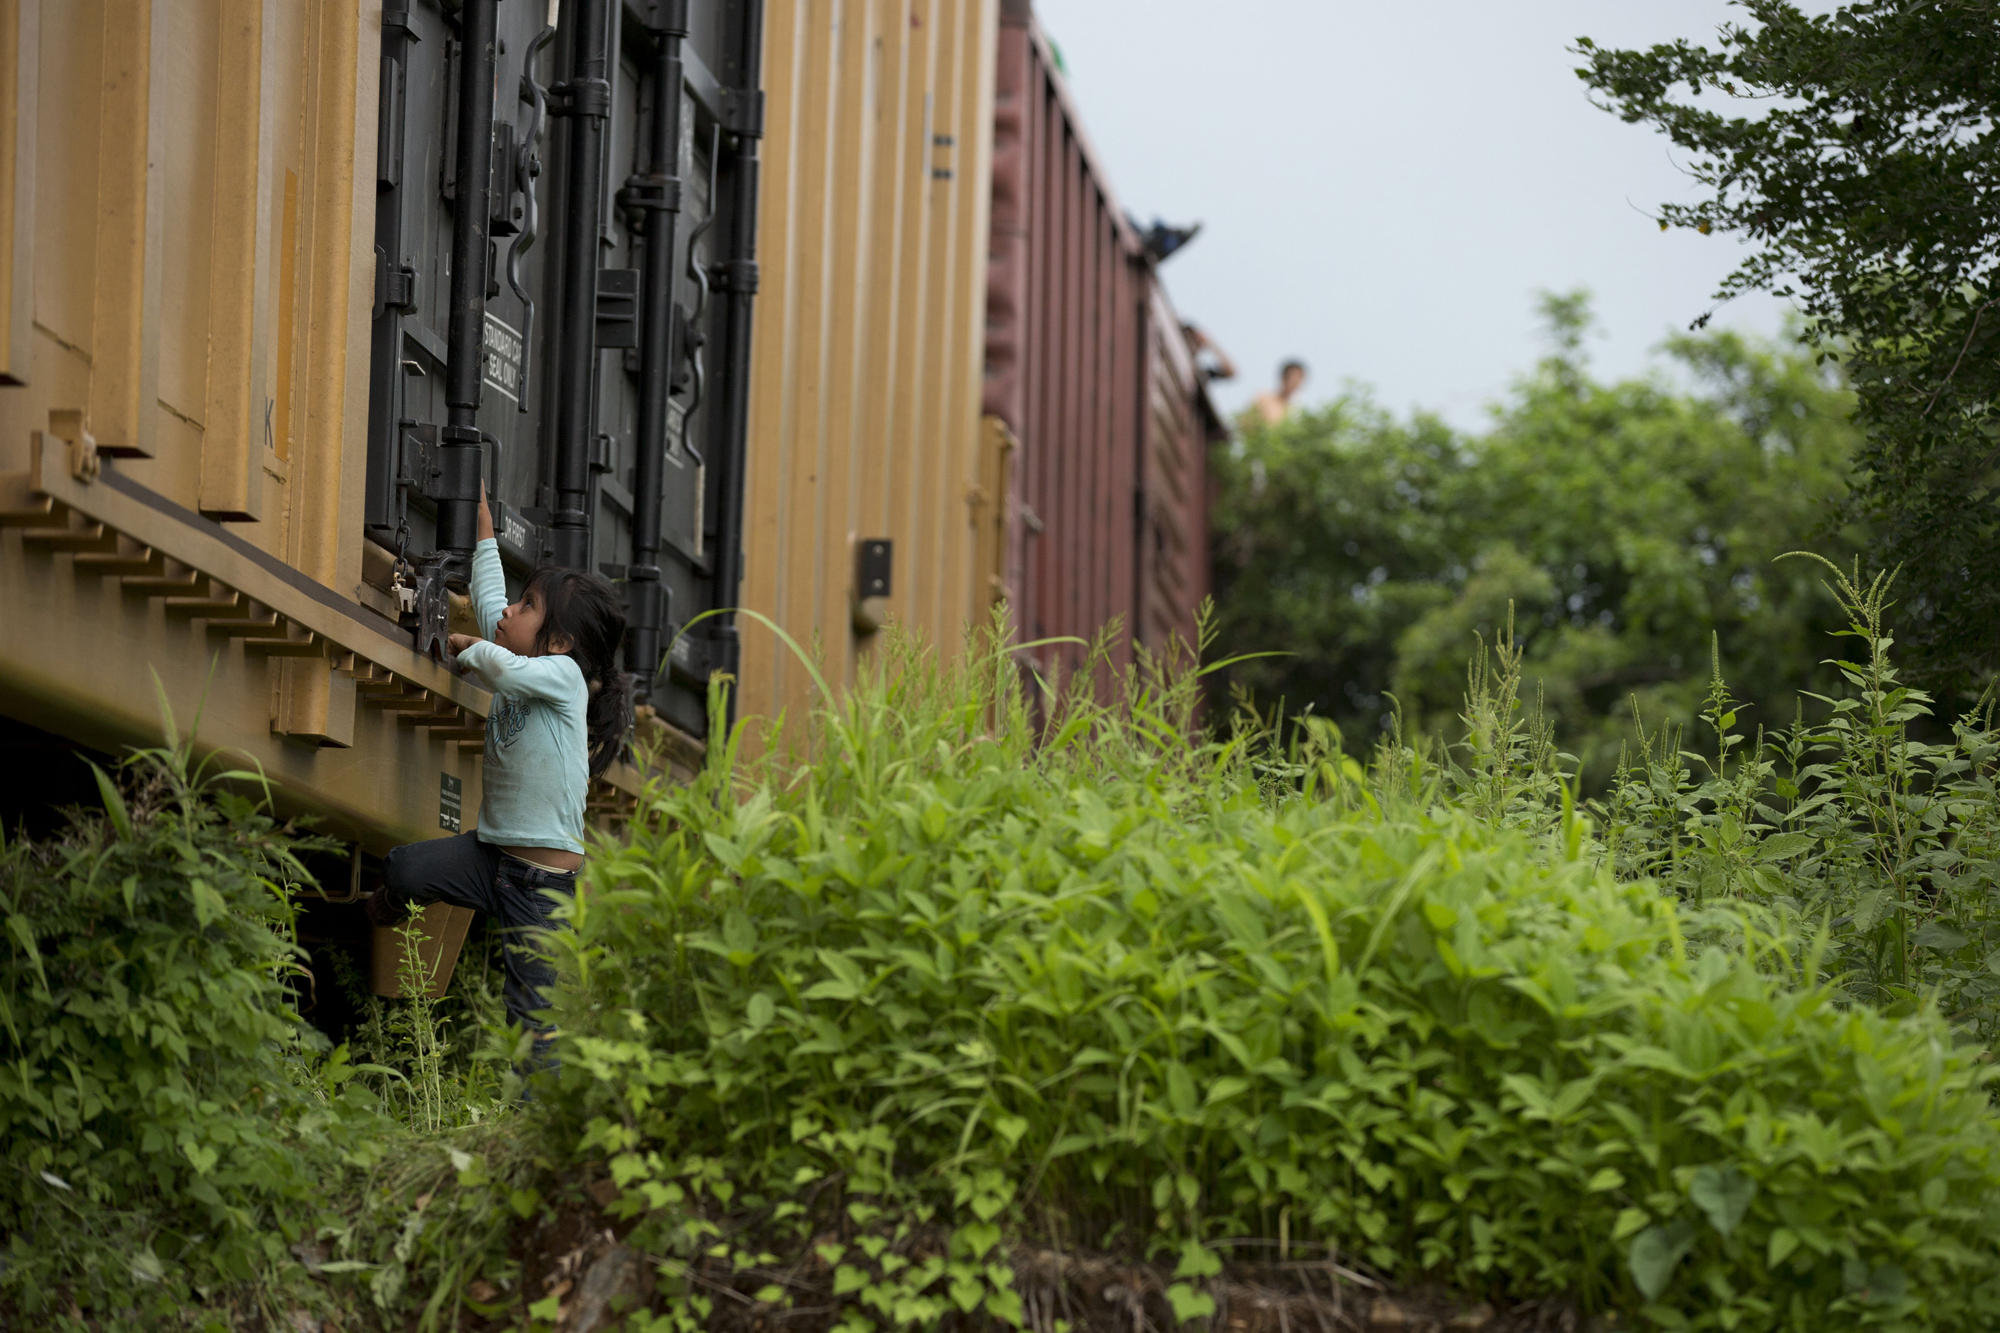 A young girl traveling with Central American migrants plays on the freight train they had been riding, after it suffered a minor derailment in a remote wooded area outside Reforma de Pineda, Mexico, June 20.